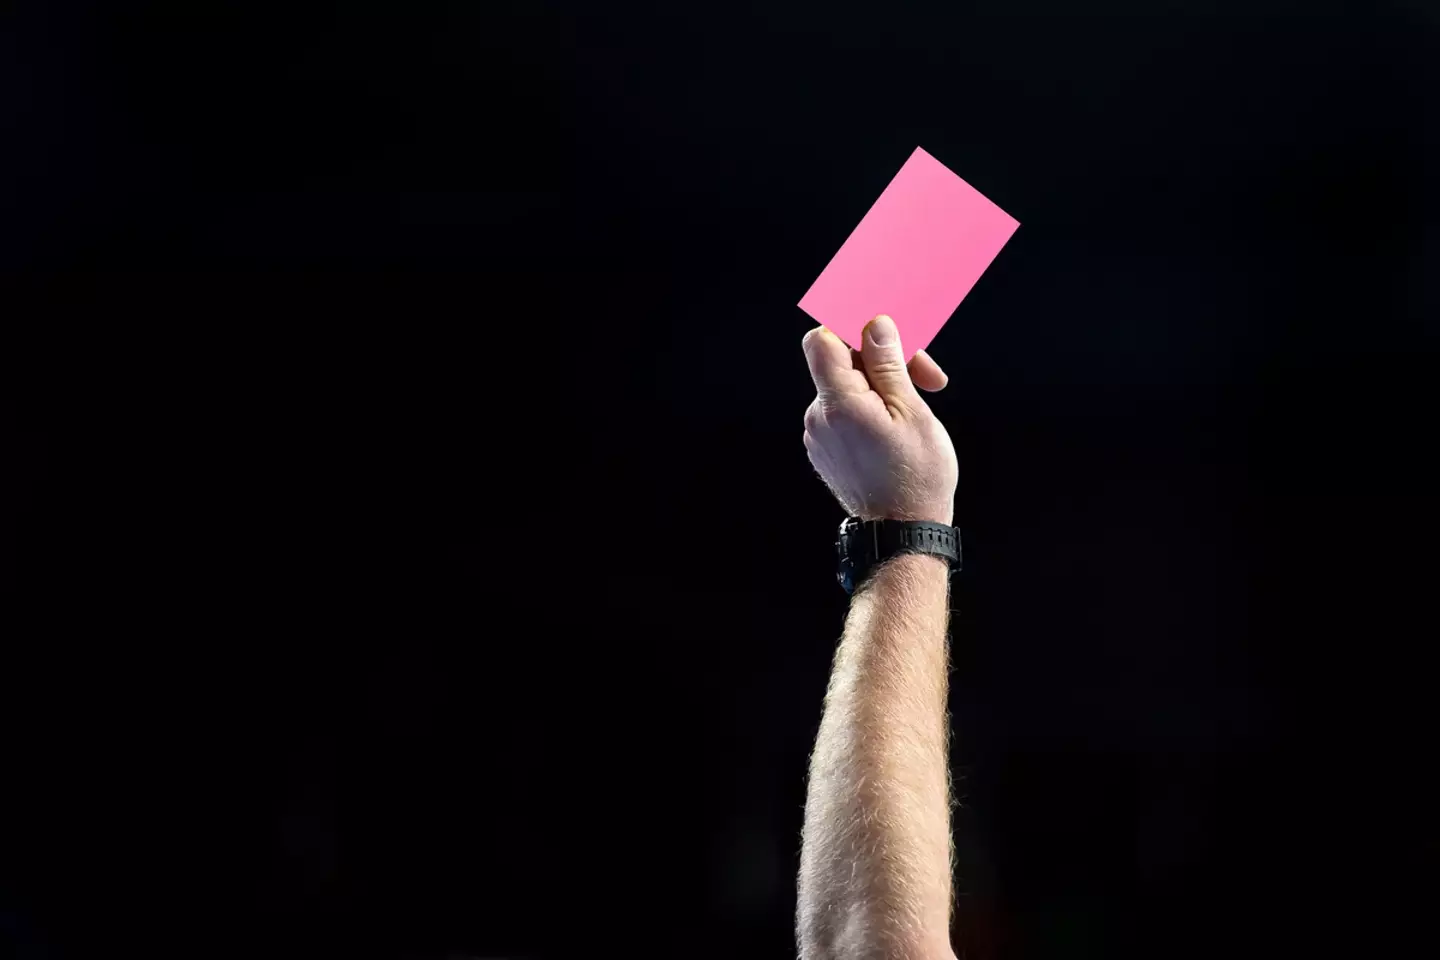 The pink card is being introduced. (Getty stock photo)